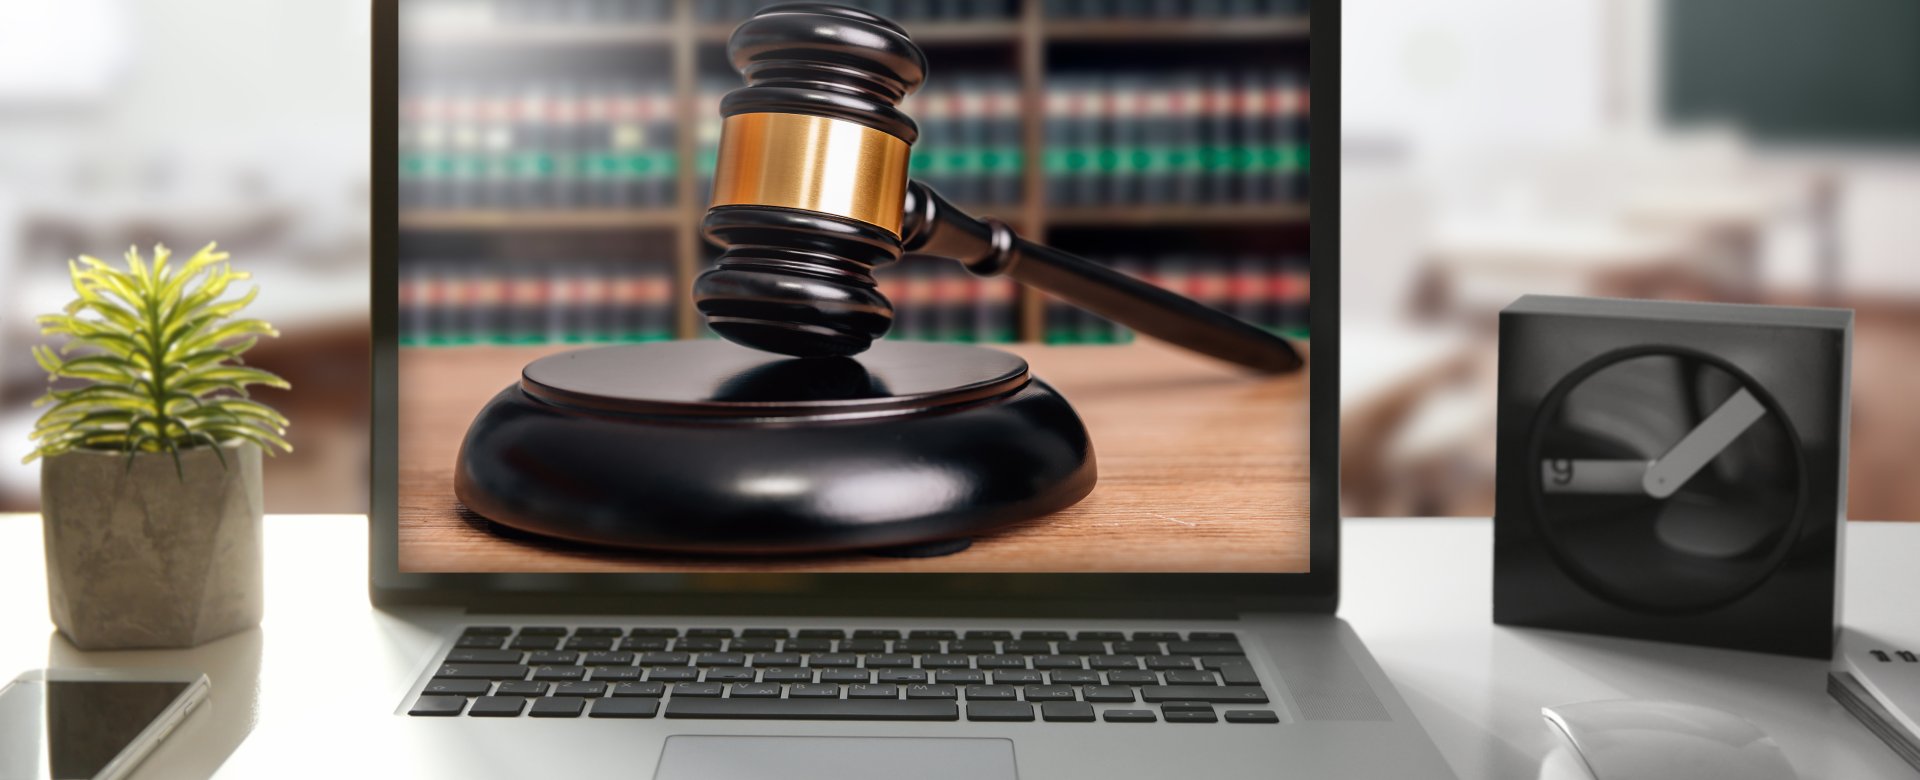 image of gavel on laptop computer